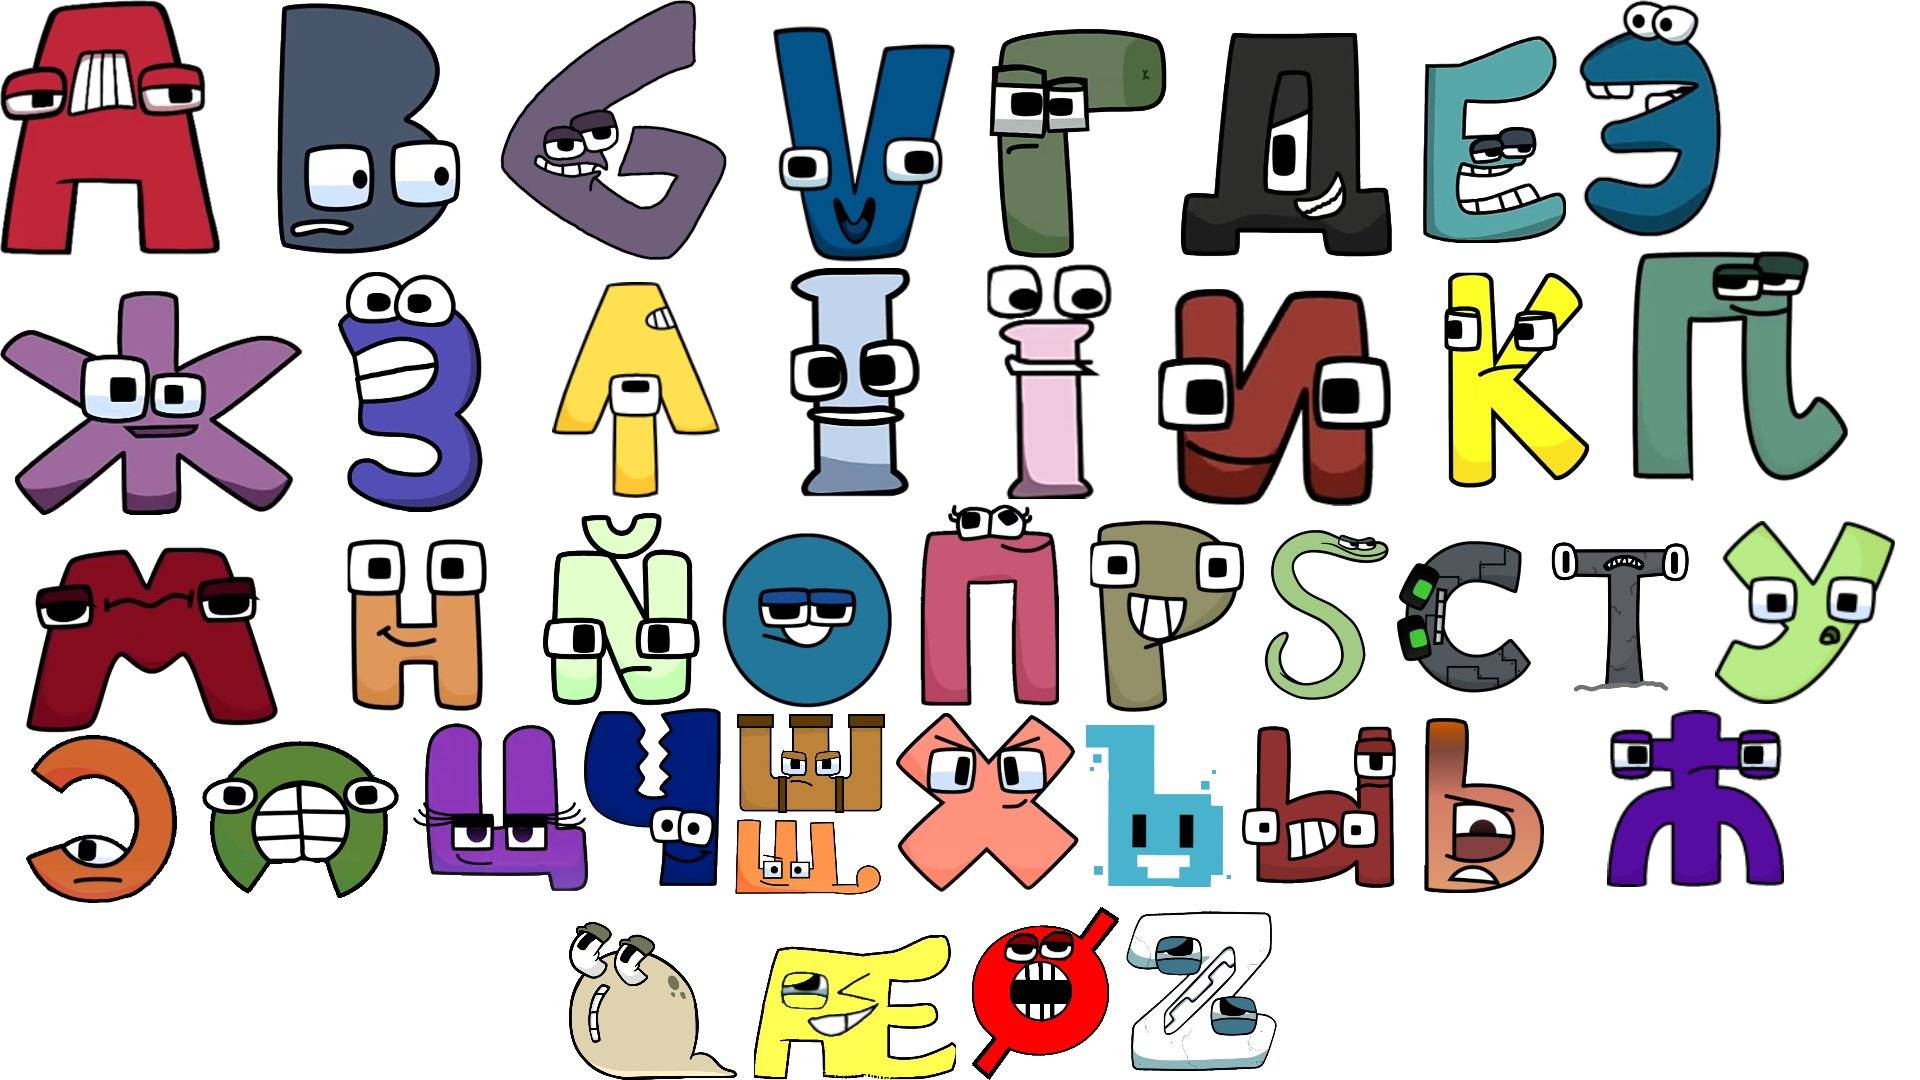 Alphabet Lore But Some Other The Creator? by TheBobby65 on DeviantArt